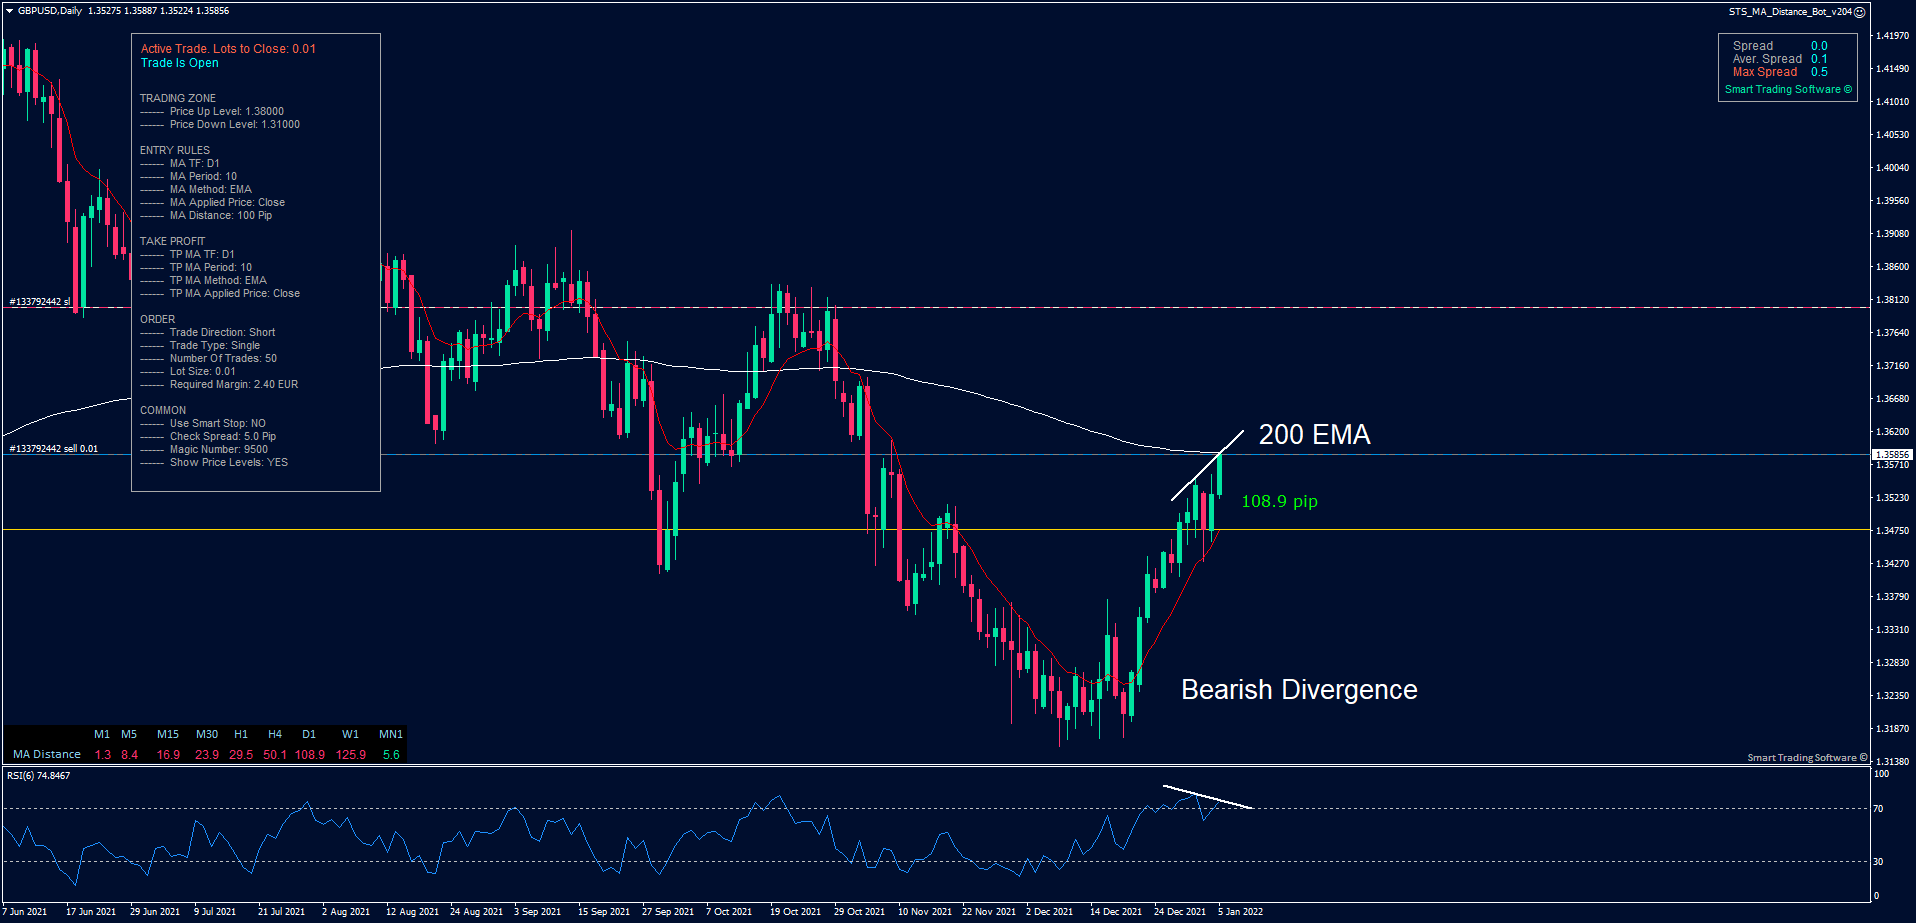 GBP/USD Daily chart